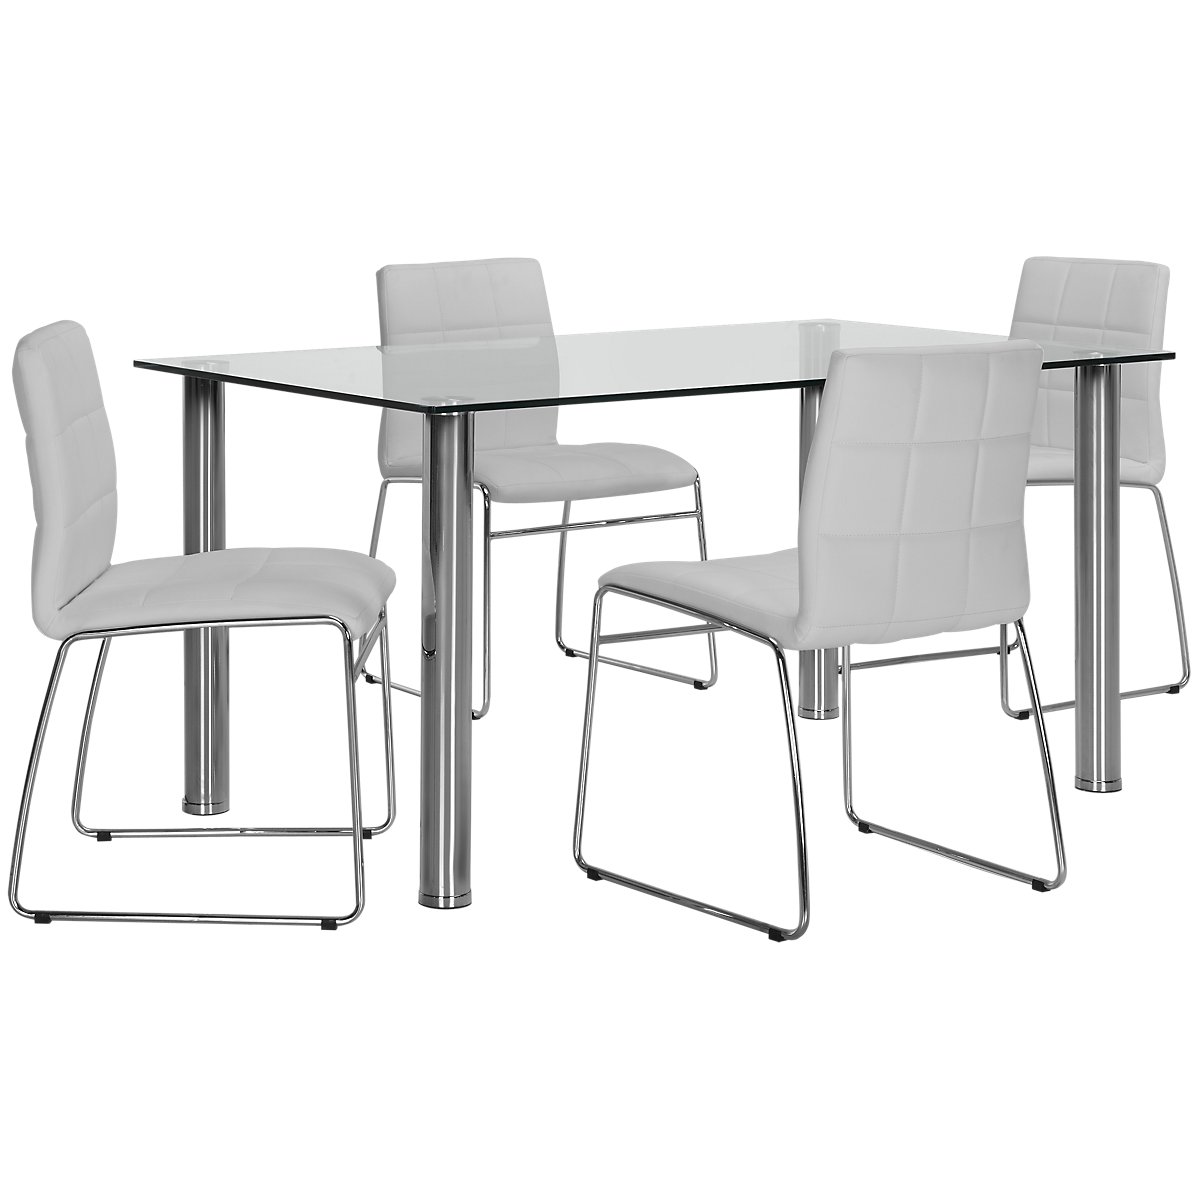 Napoli White Glass Table & 4 Upholstered Chairs